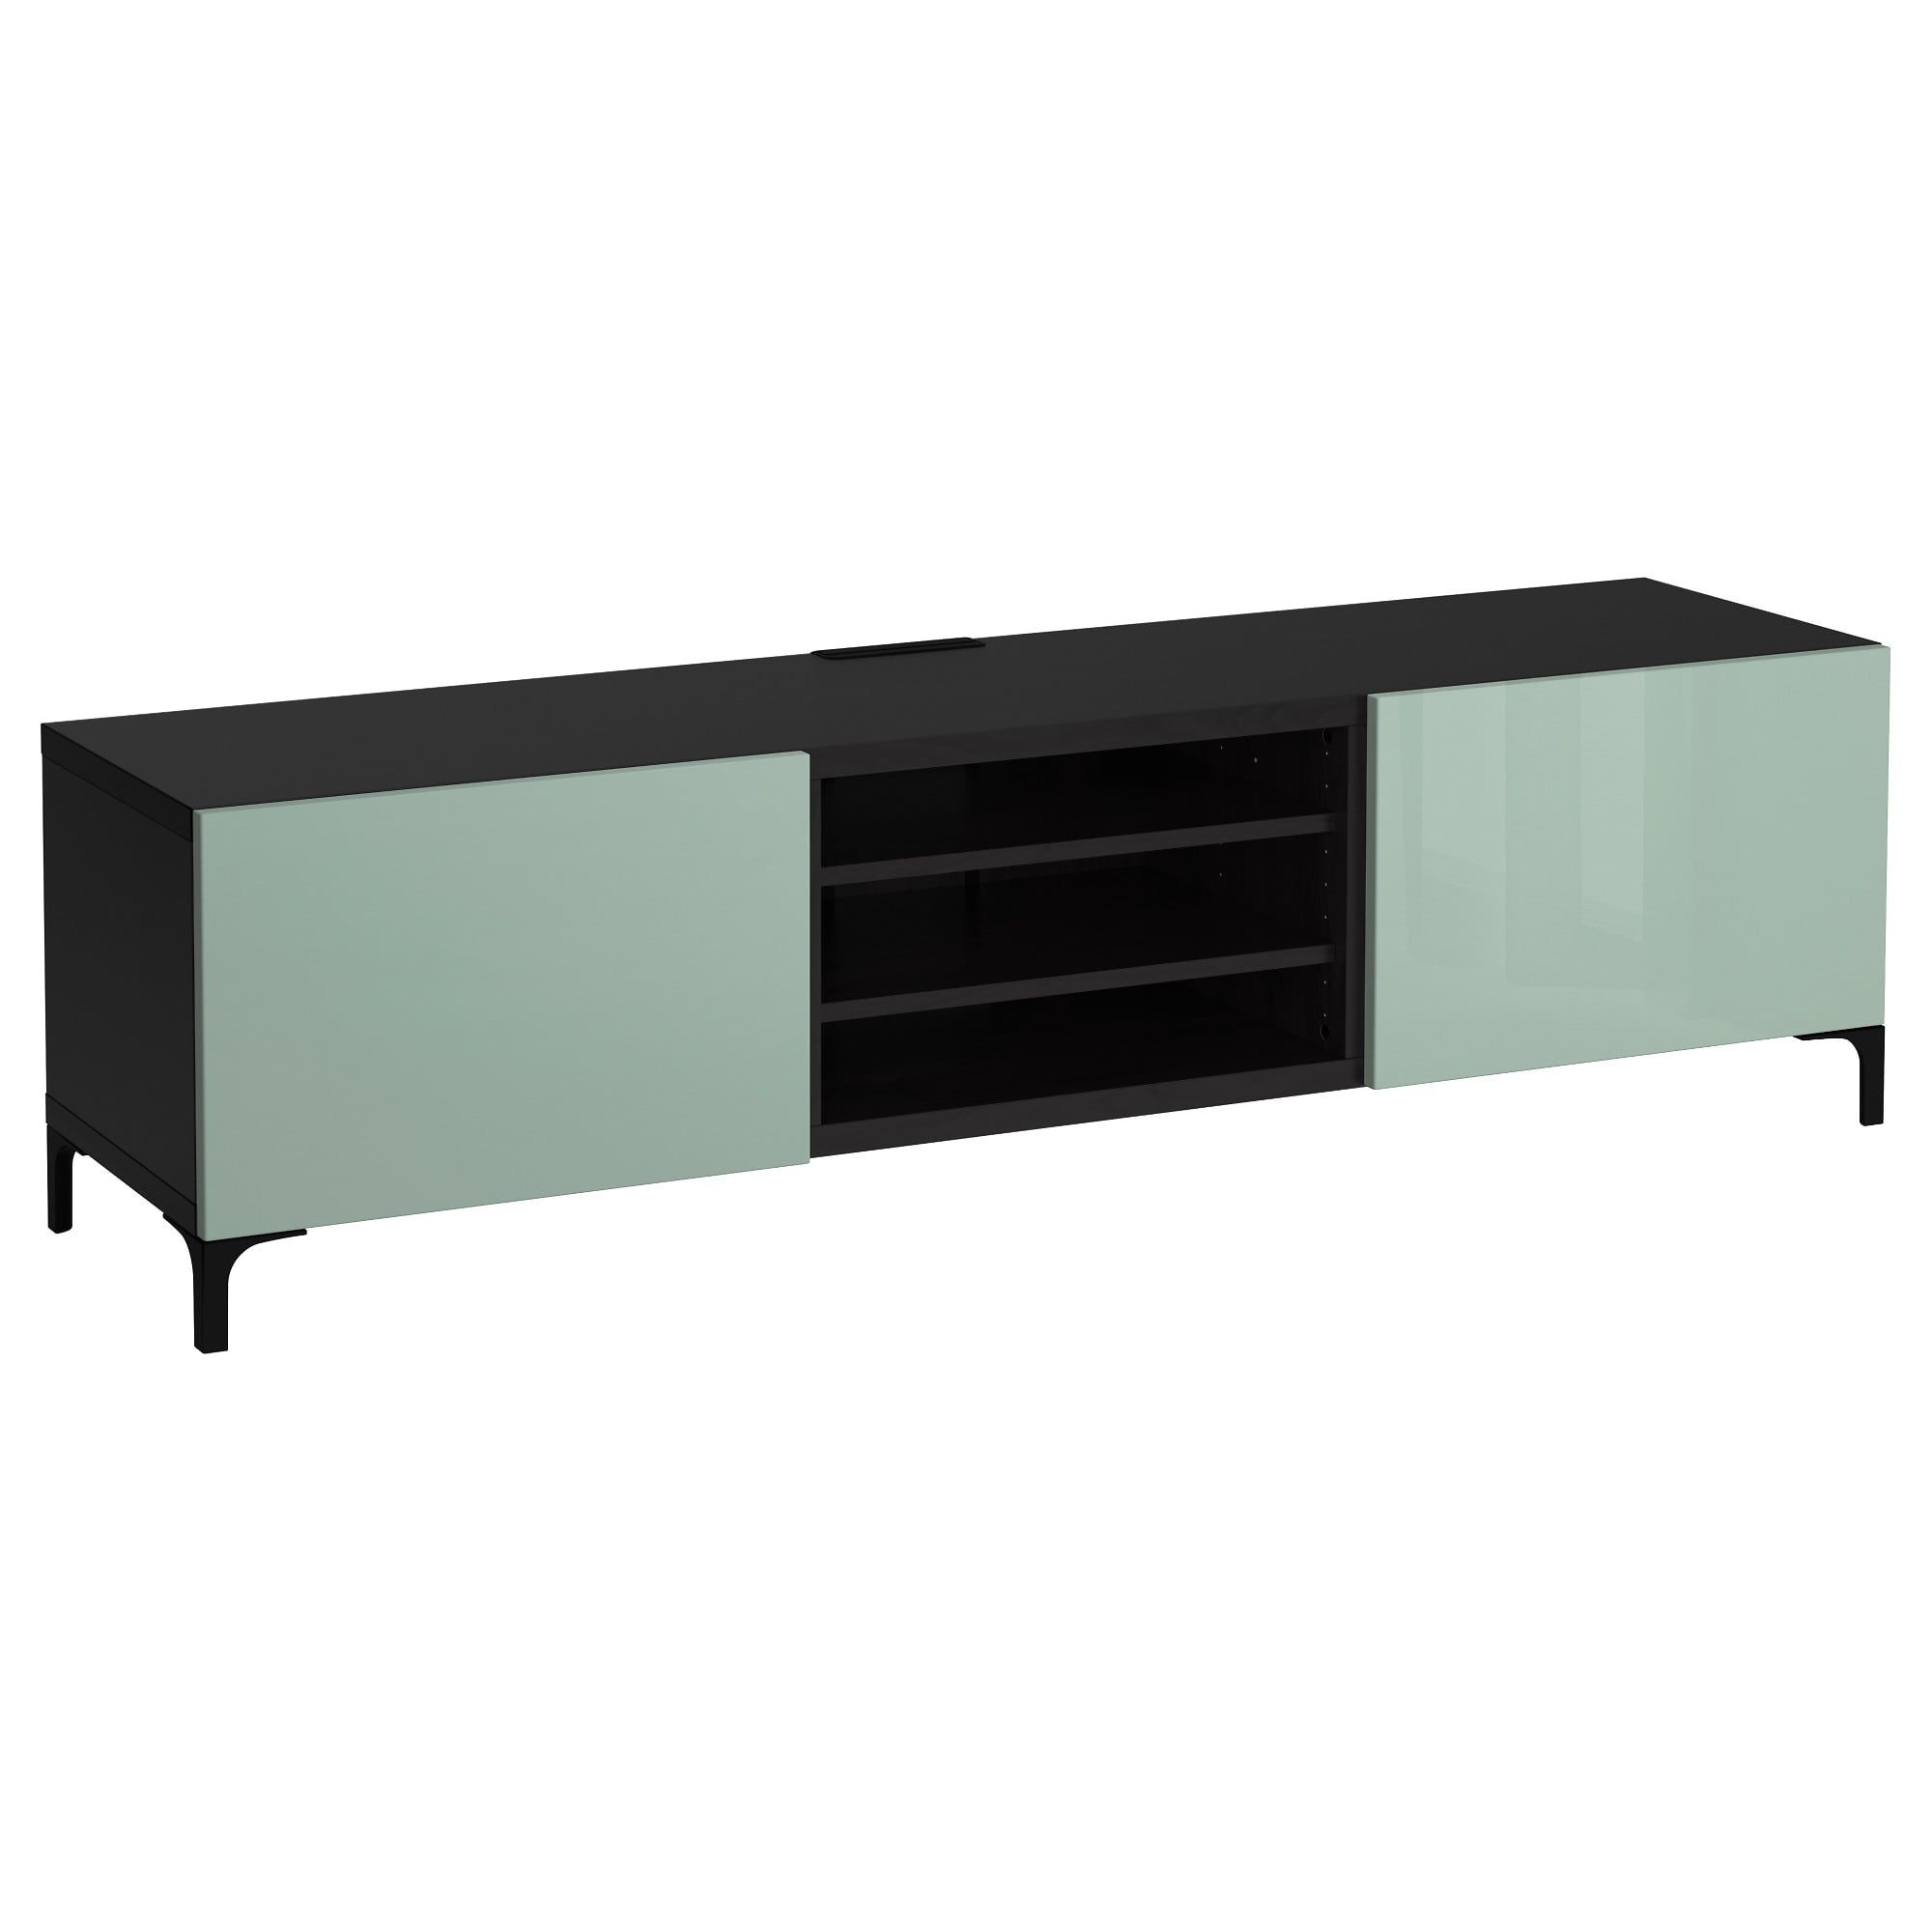 Favorite Black Gloss Tv Benches Pertaining To Bestå Tv Bench With Drawers Black Brown/selsviken High Gloss/light (View 2 of 20)